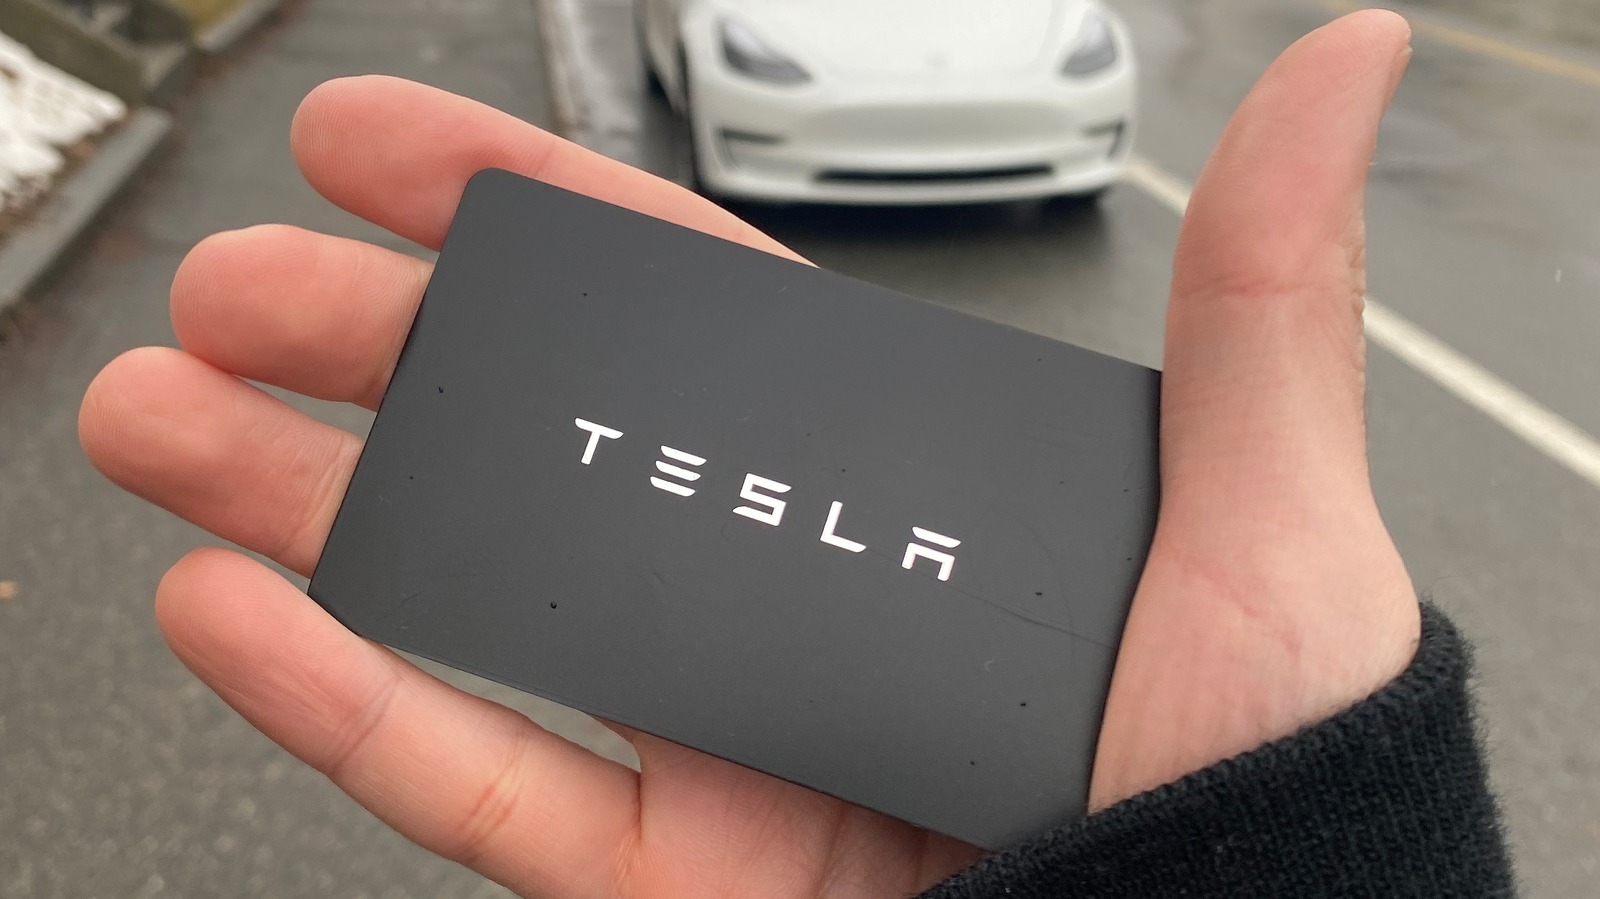 The 20 Dollar Device That Can Break Into A Tesla